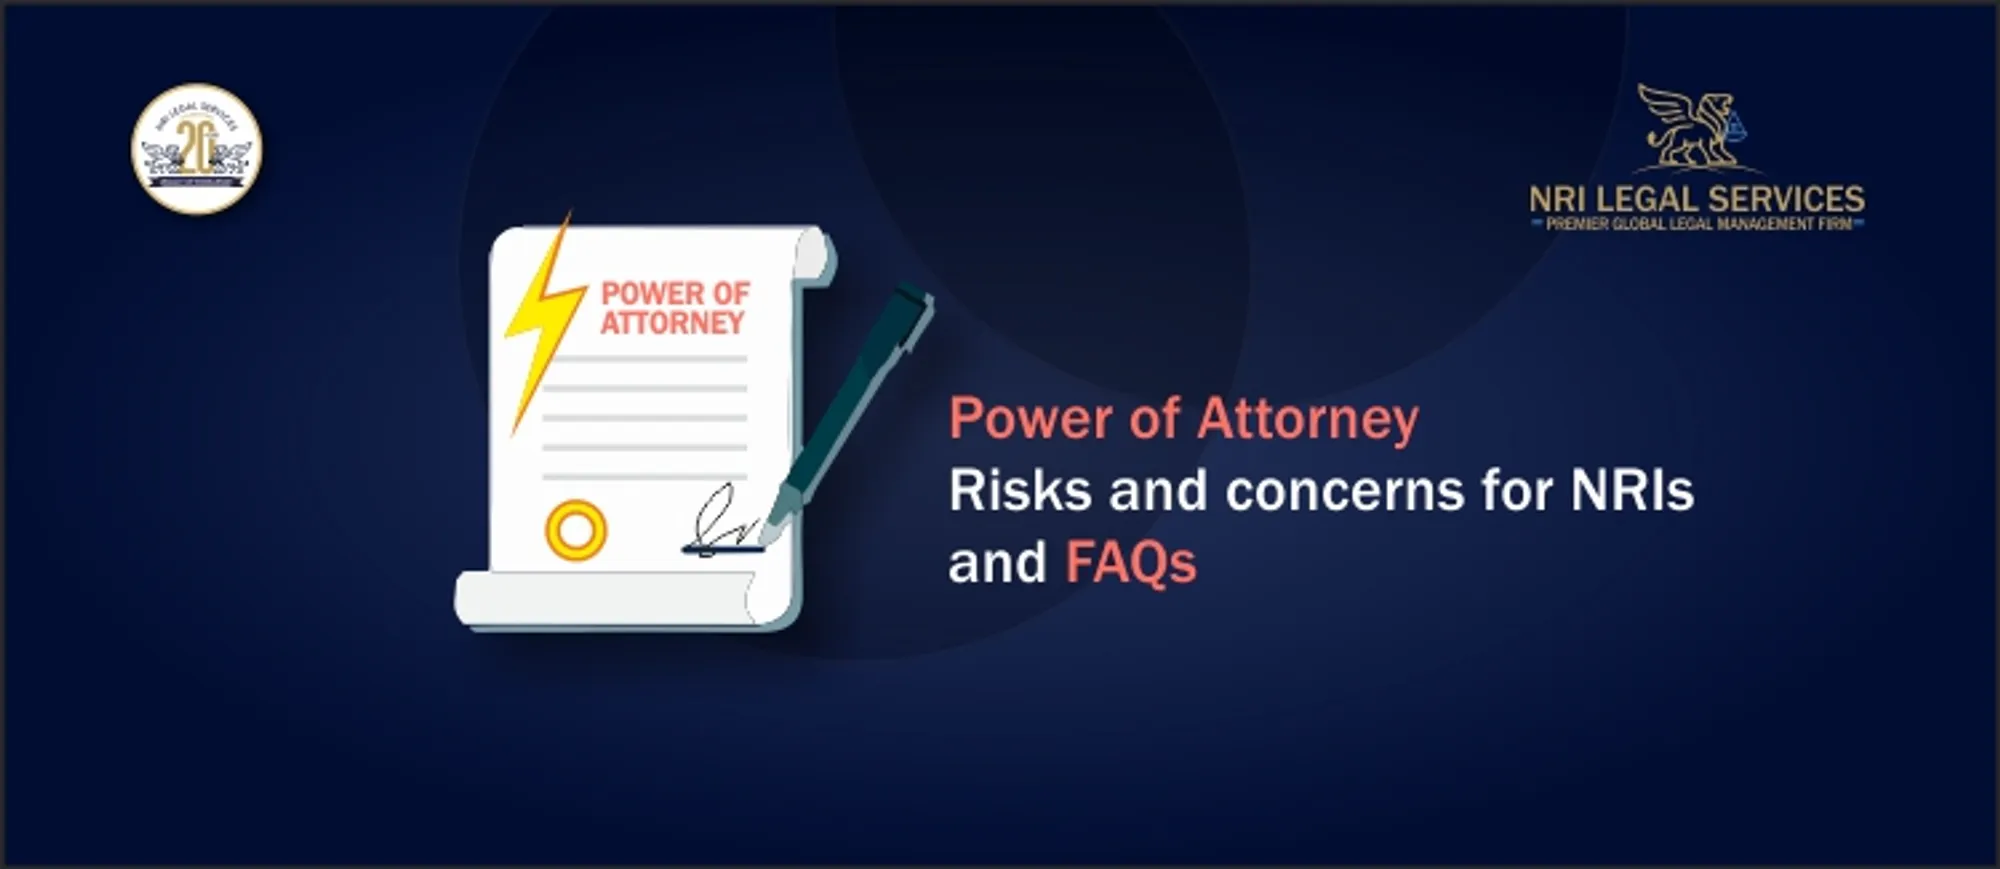 Power of Attorney Risks and concerns for NRIs FAQs